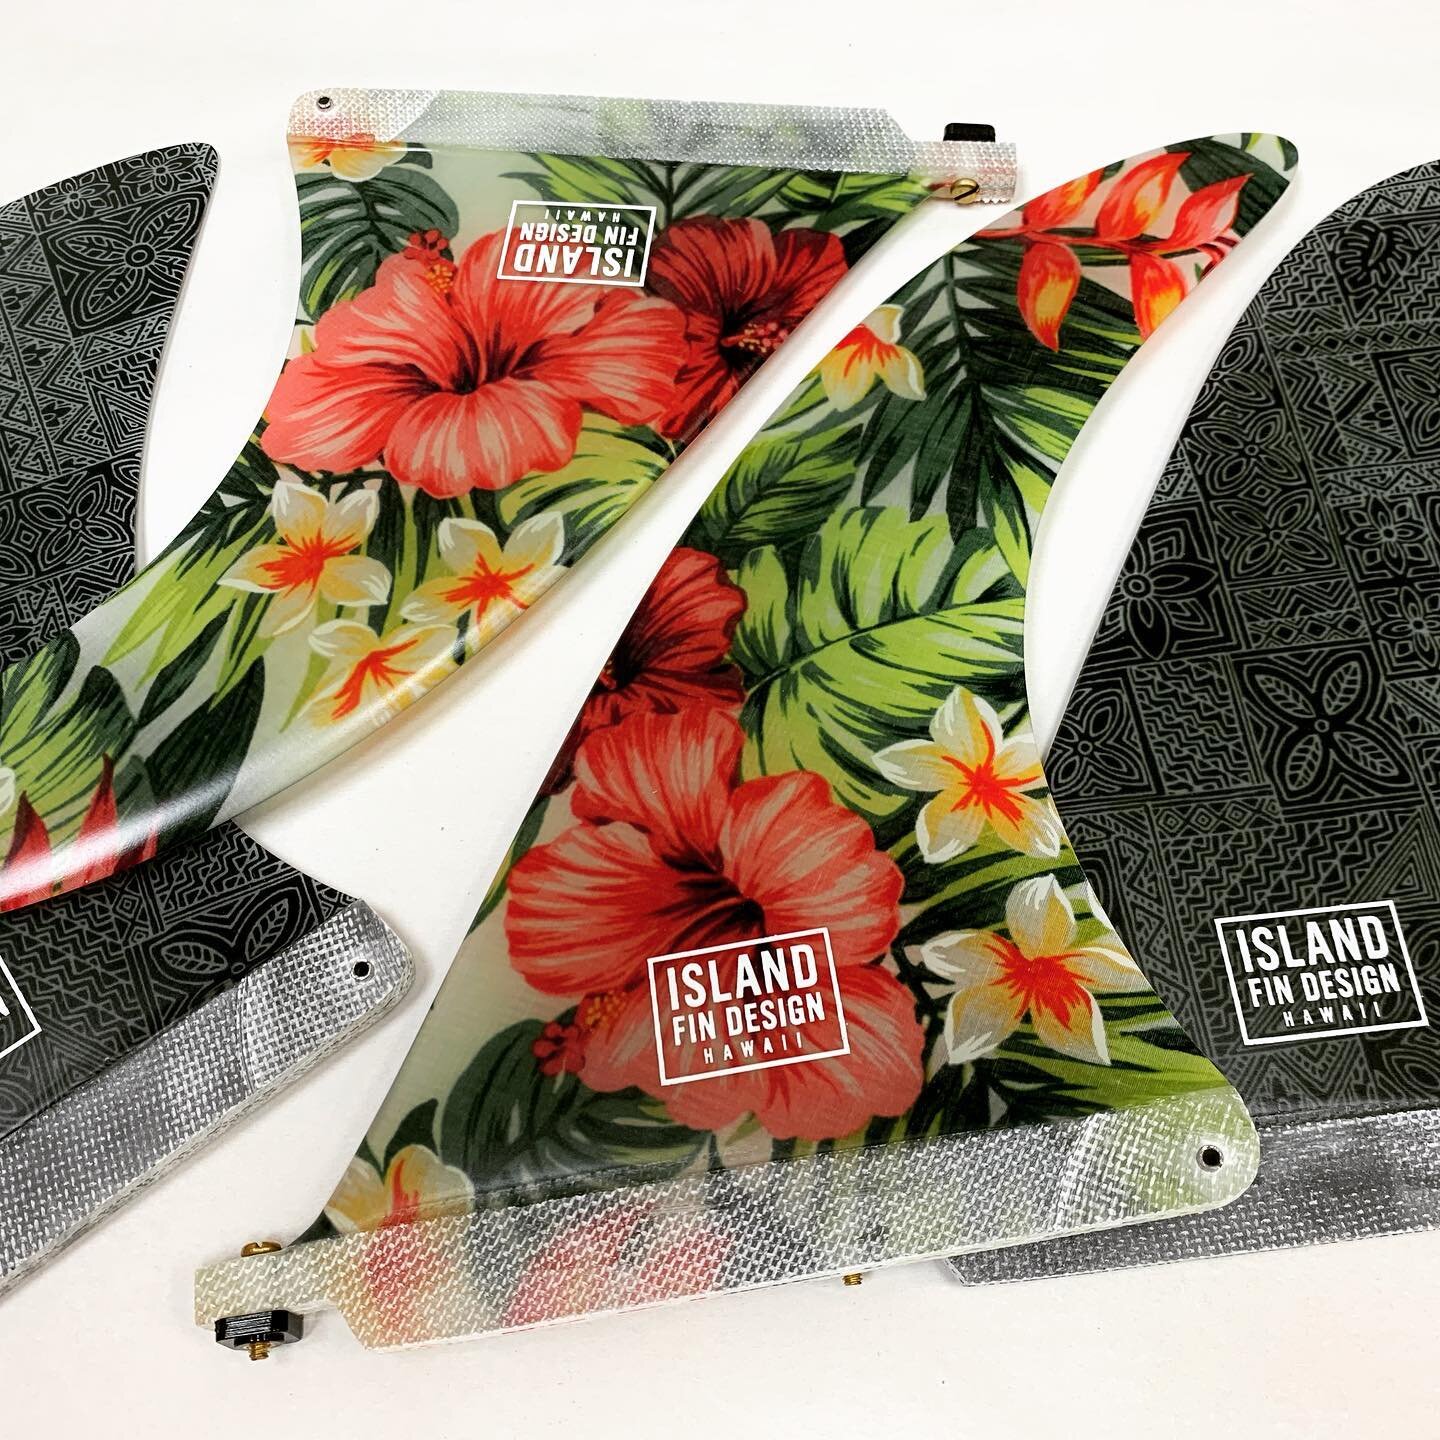 Aloha Prints in our Leeward (9.0 &amp; 9.5) and Islander (8.5, 9.0, 9.5 &amp; 10.0) templates.